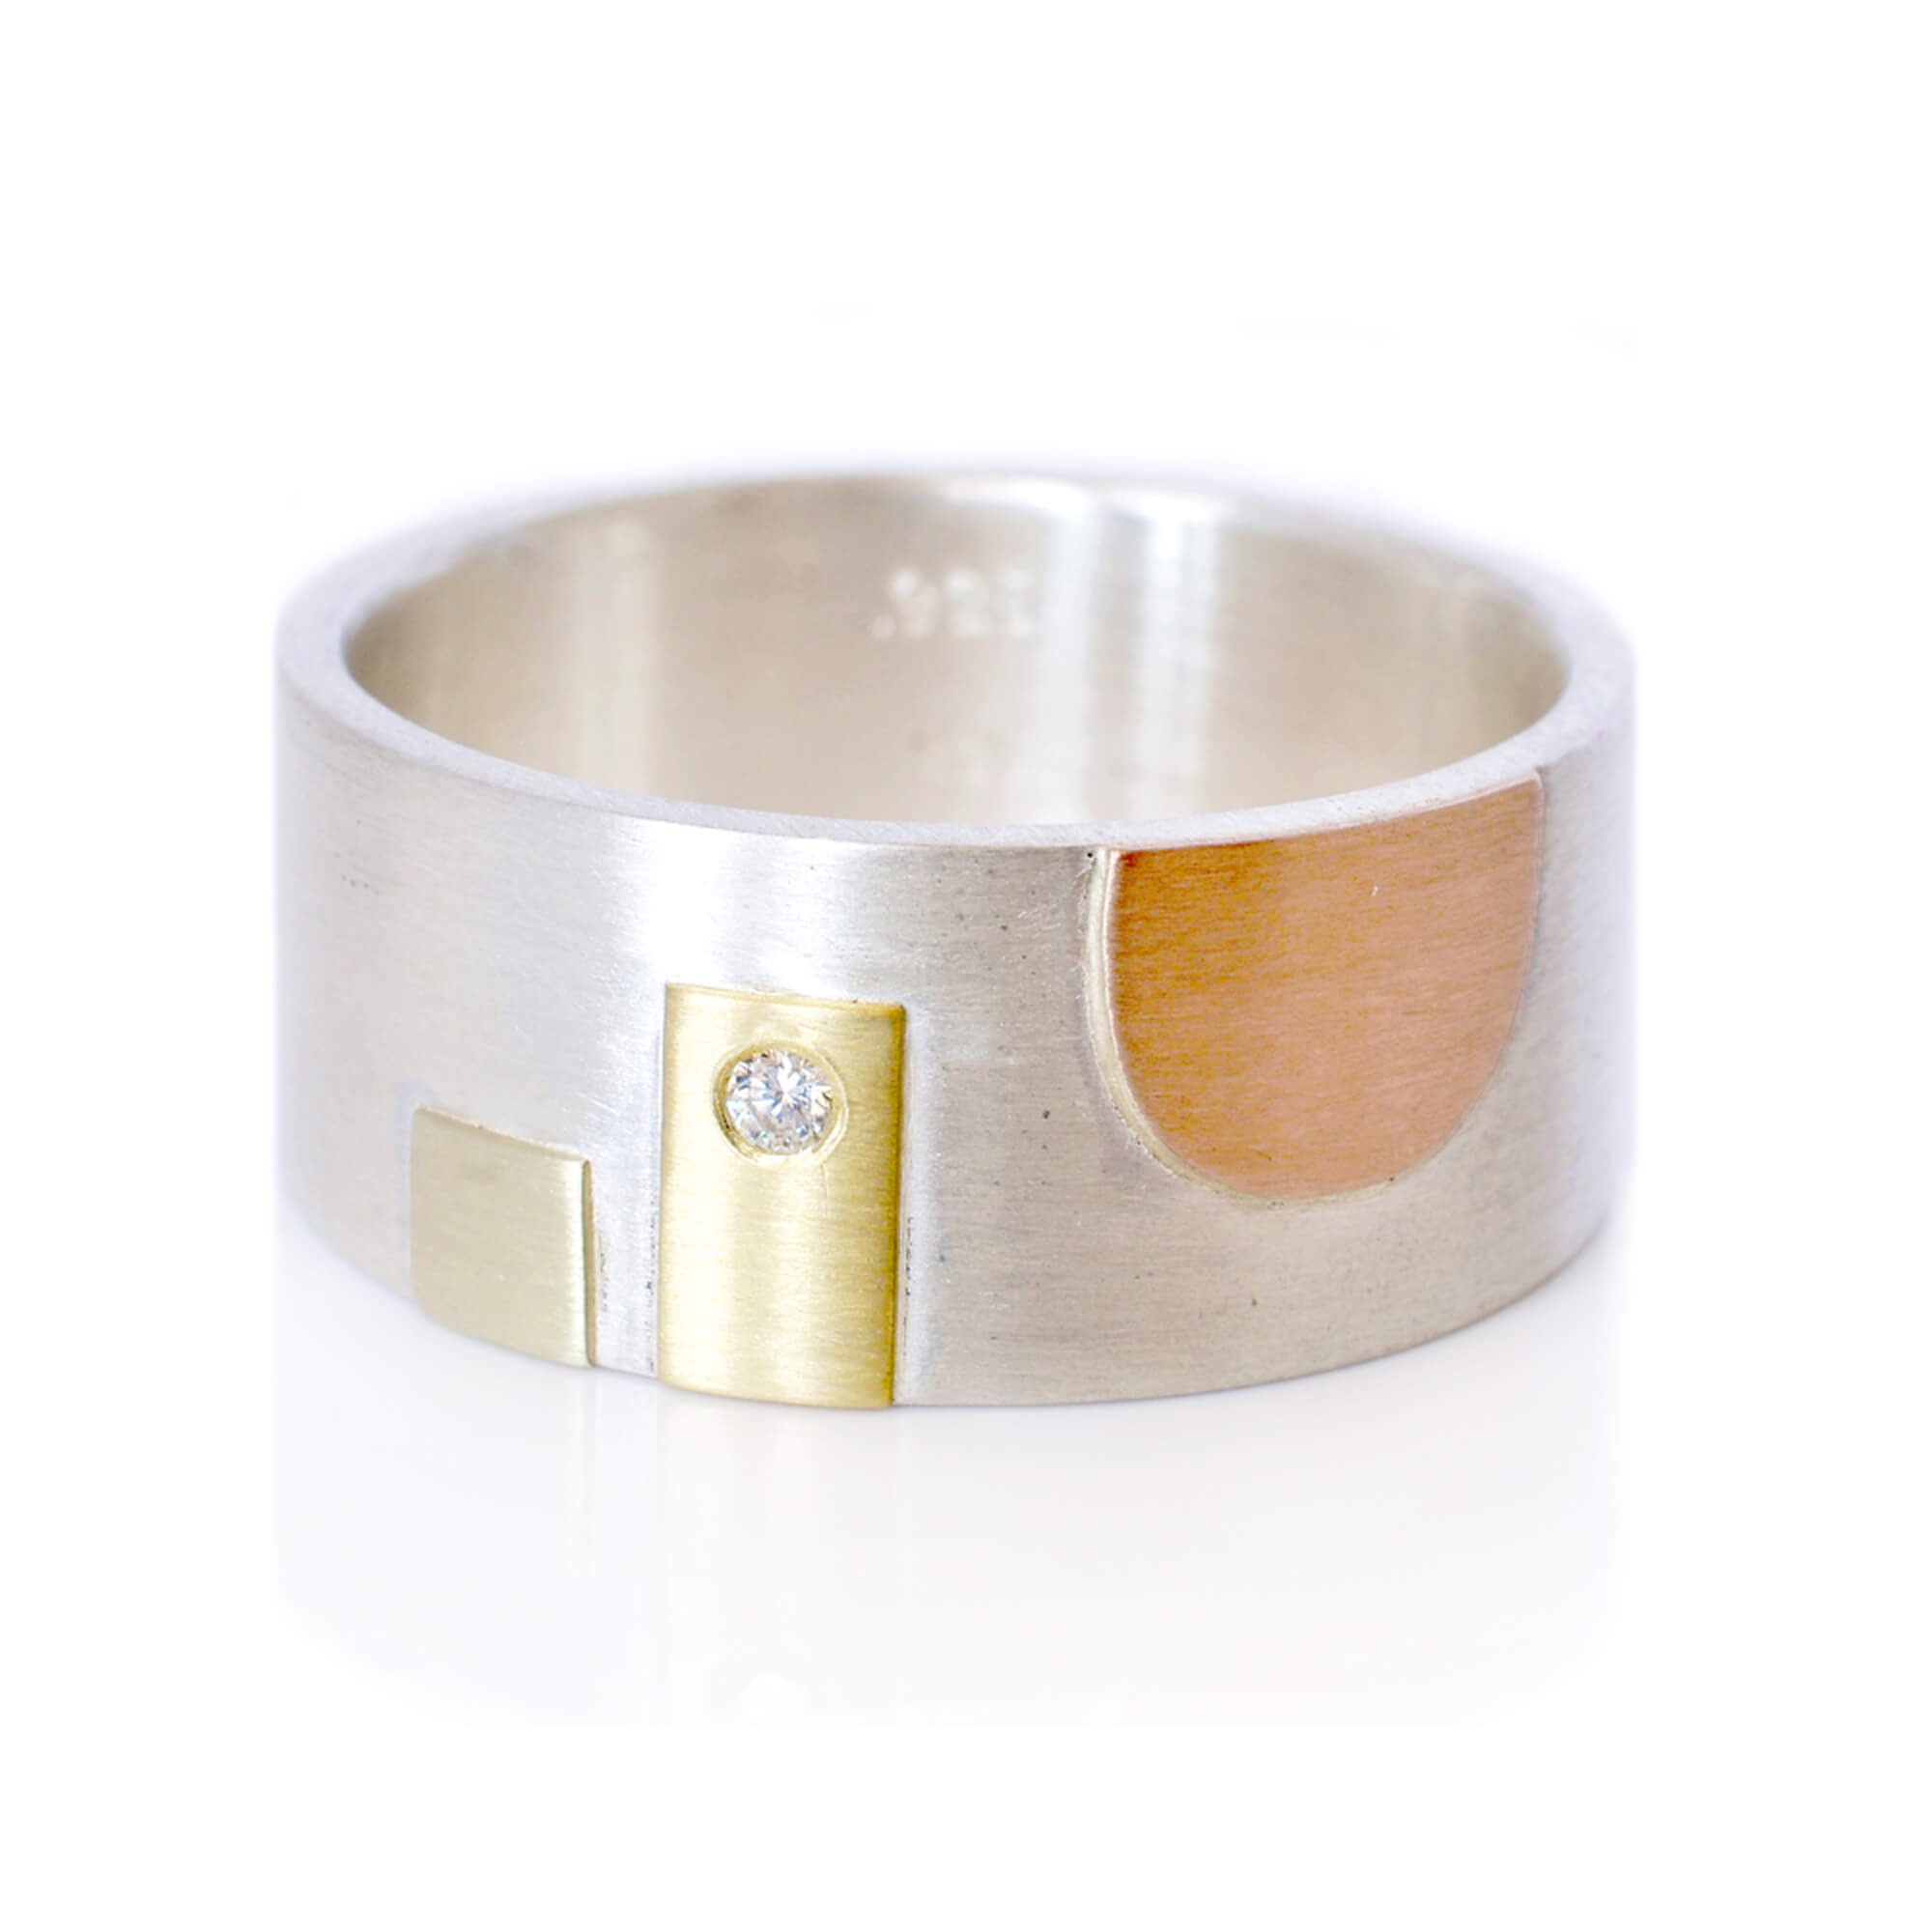 Sterling silver rivet band with rose gold, yellow gold, green gold, and diamond accent. Handmade with recycled metal and conflict-free stone. Designed and sold by EC Design Jewelry in Minneapolis, MN